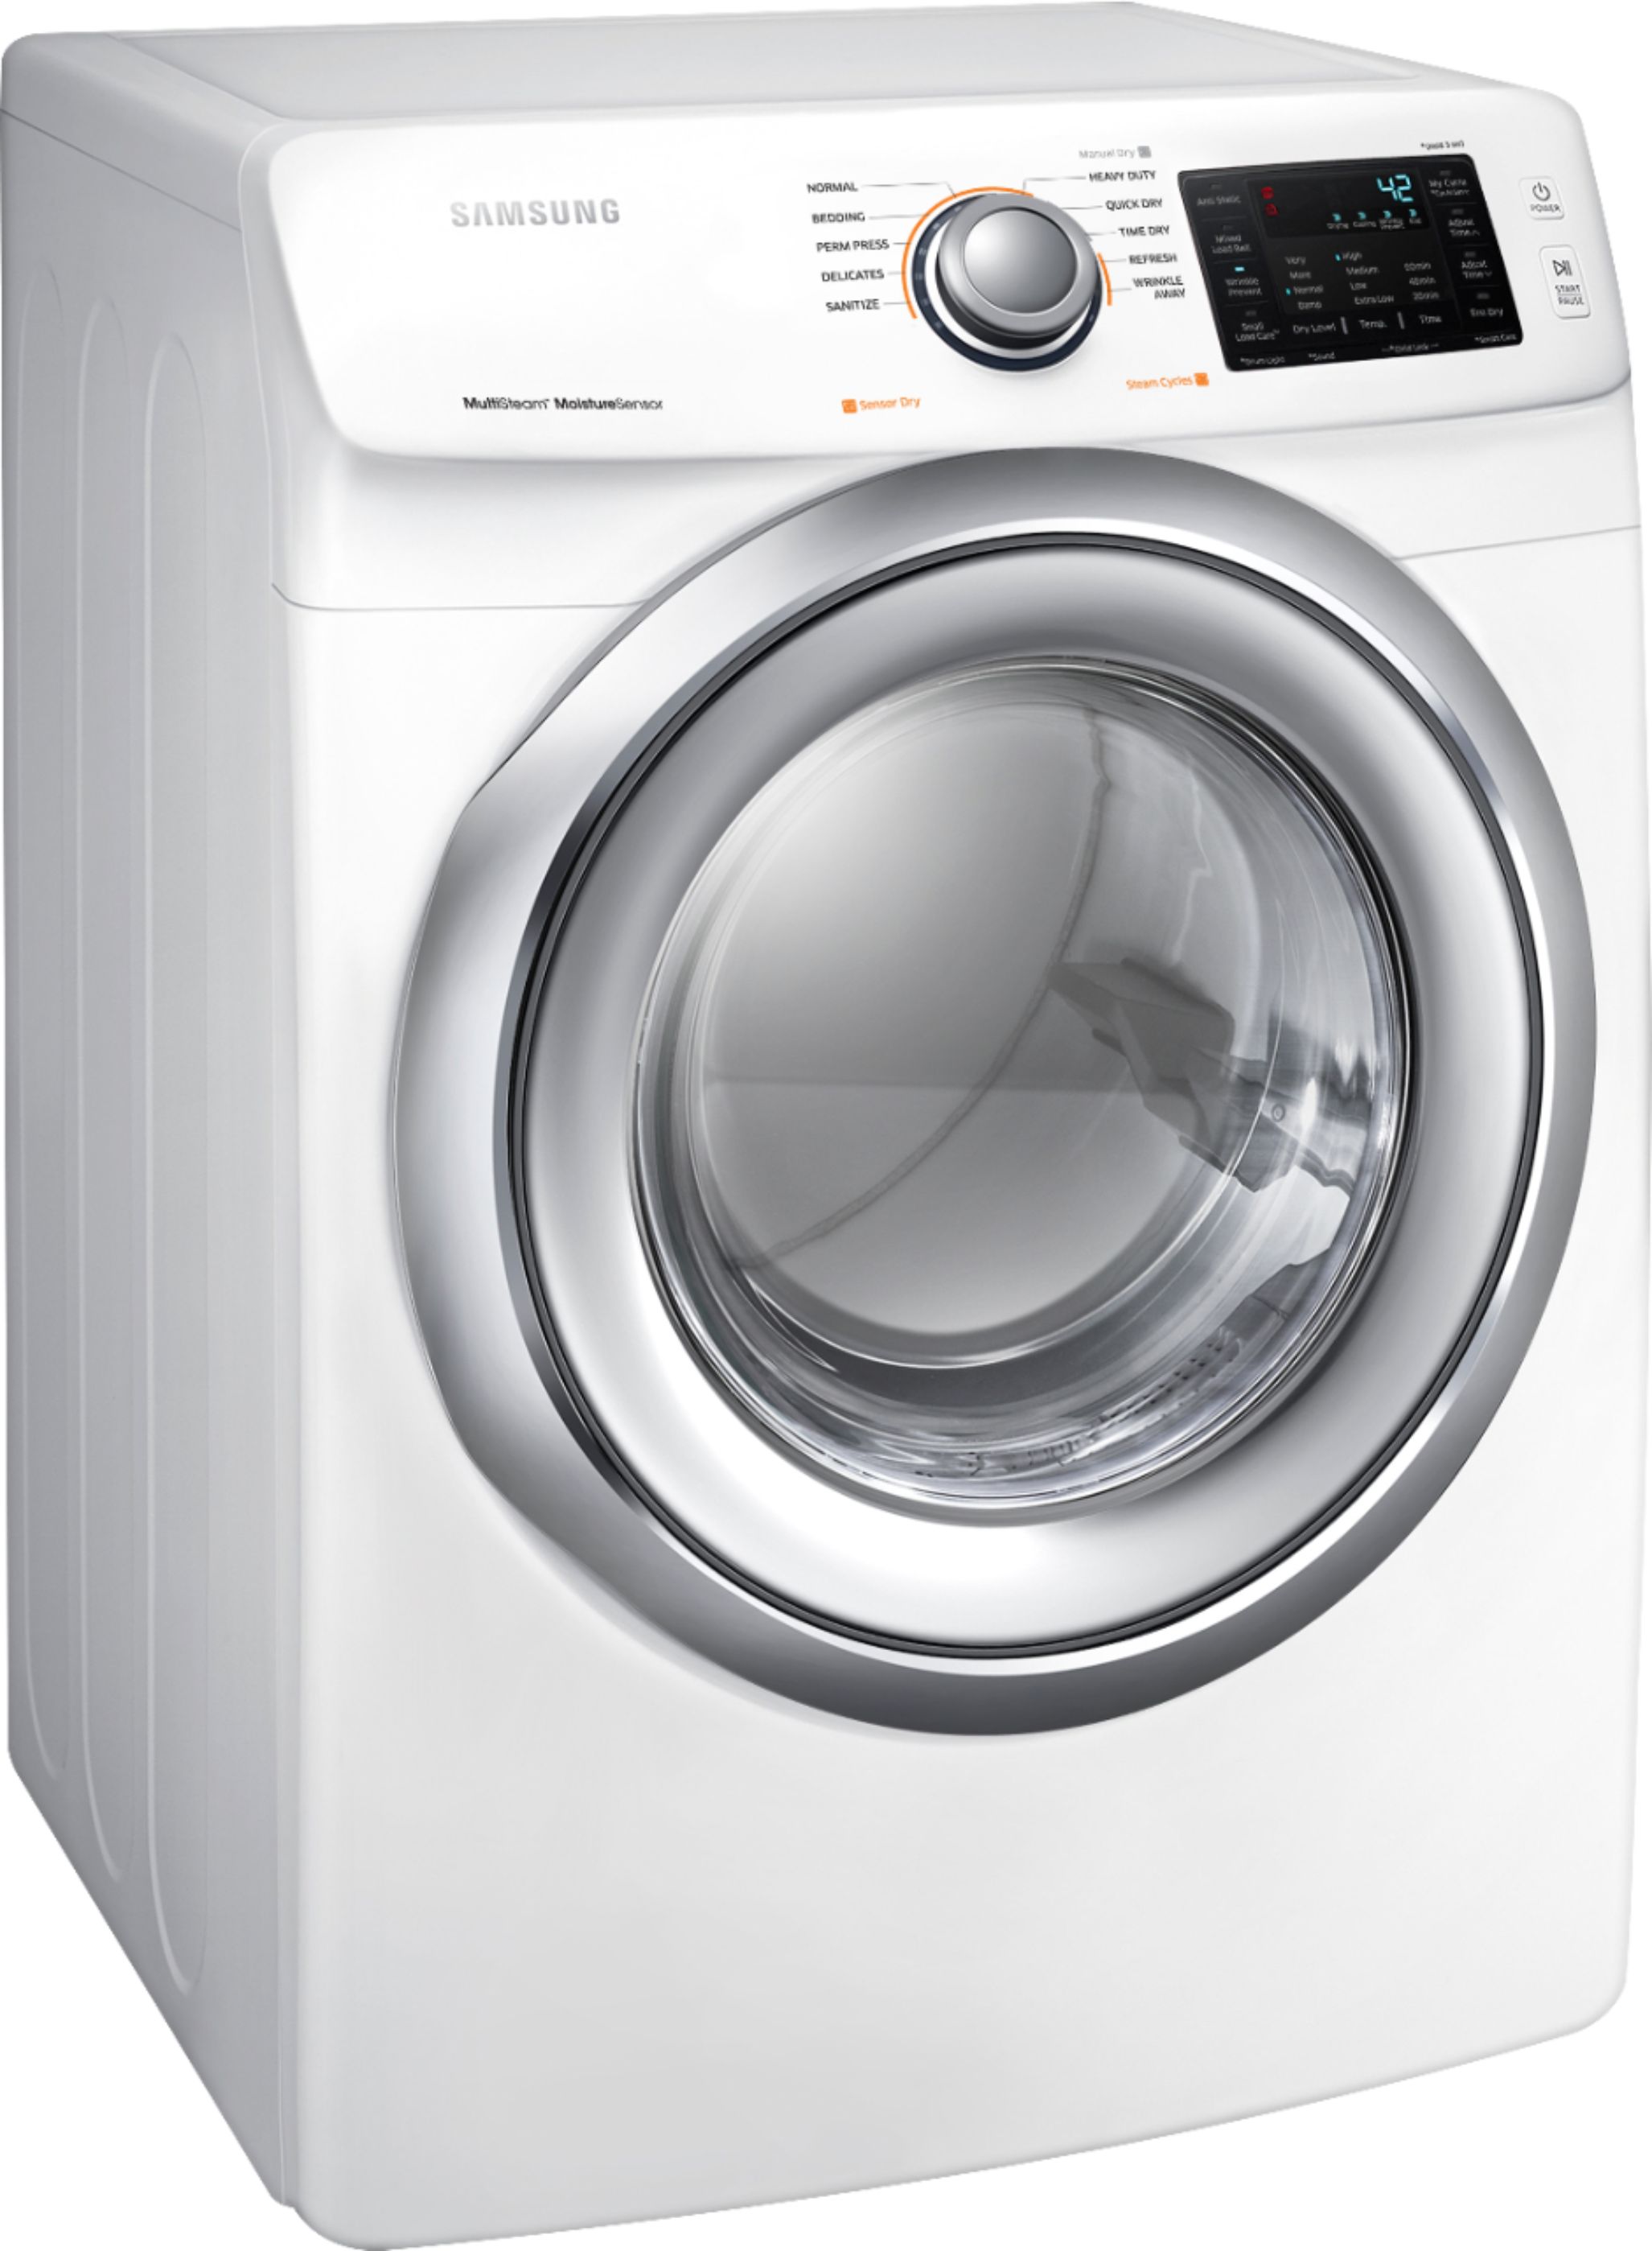 samsung-7-5-cu-ft-10-cycle-gas-dryer-with-steam-white-dvg45n5300w